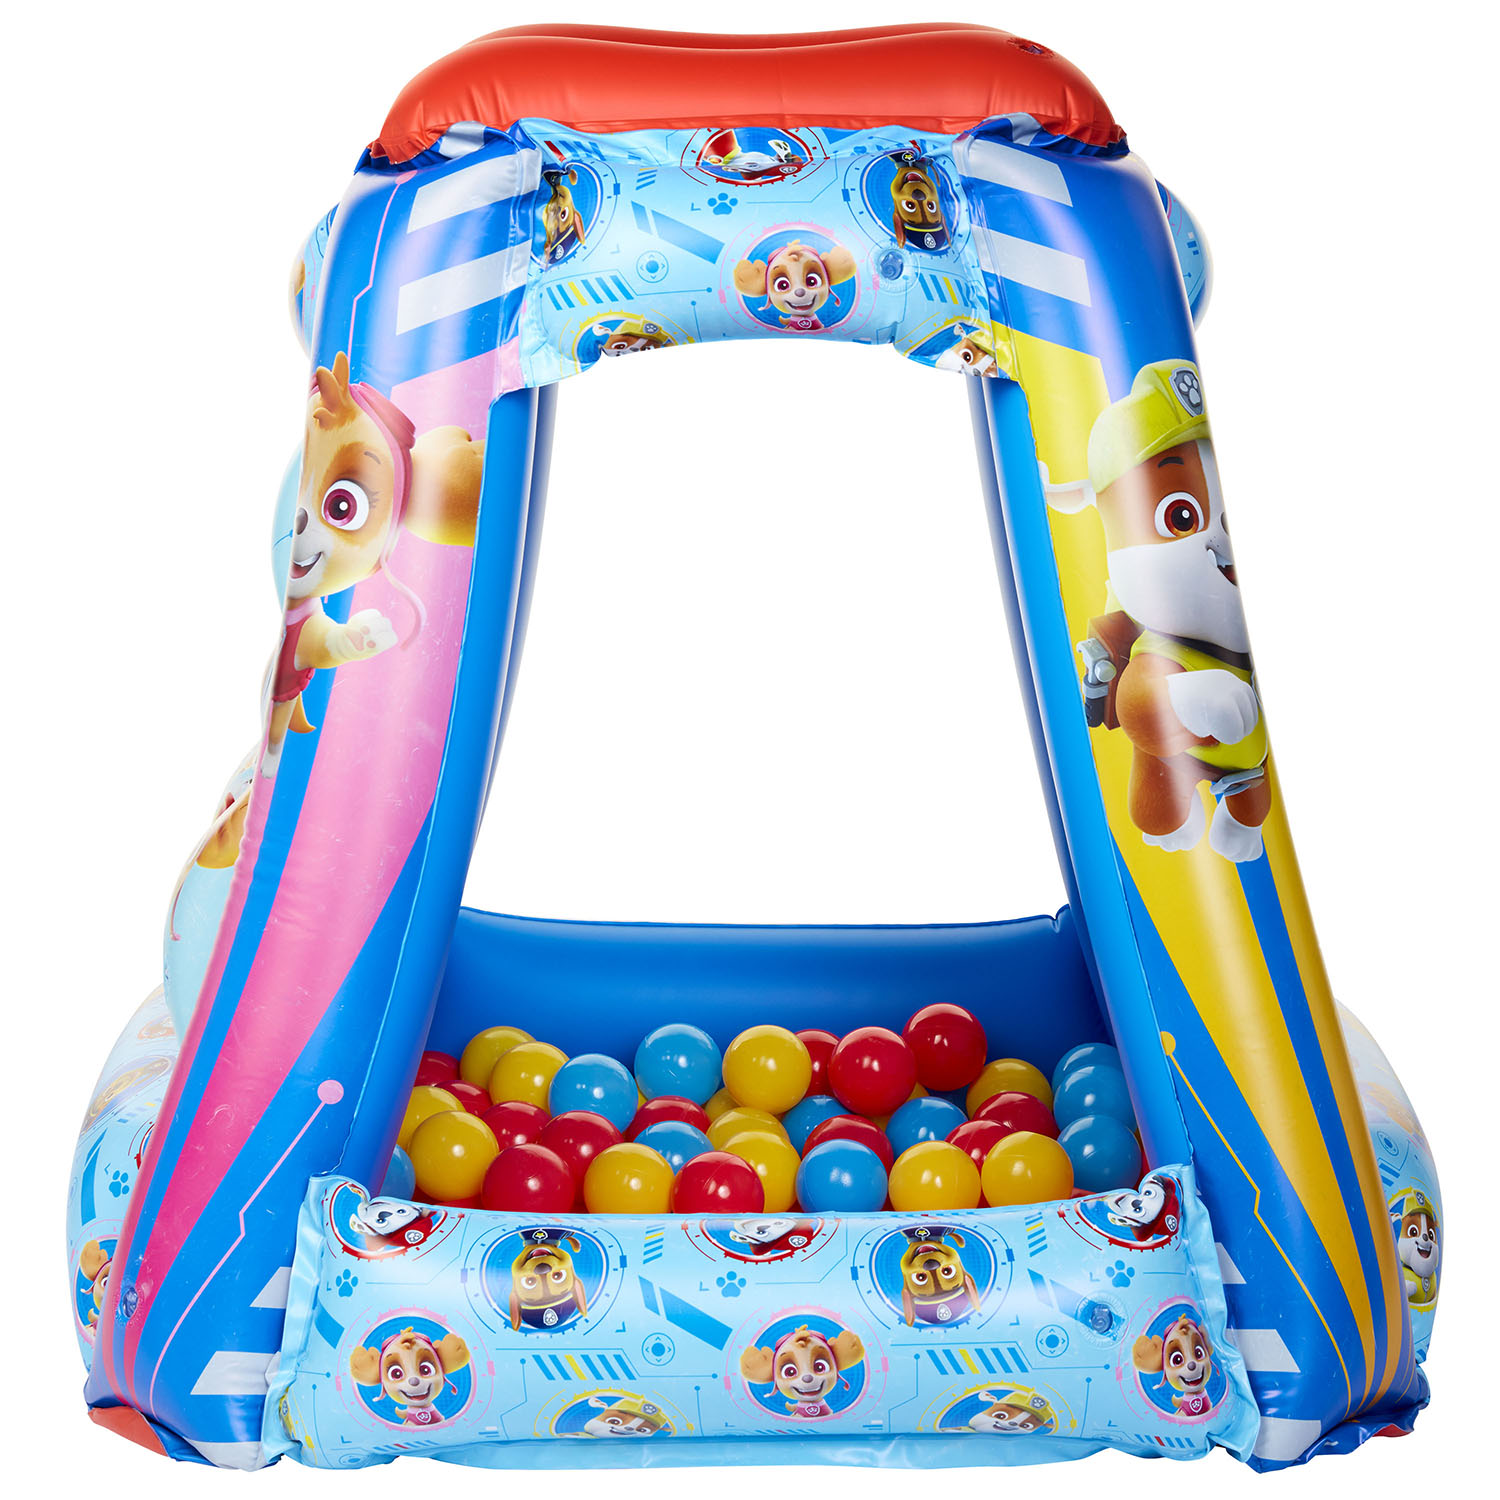 Paw Patrol Inflatable Playland Ball Pit with 20 Soft Flex Balls - image 5 of 5